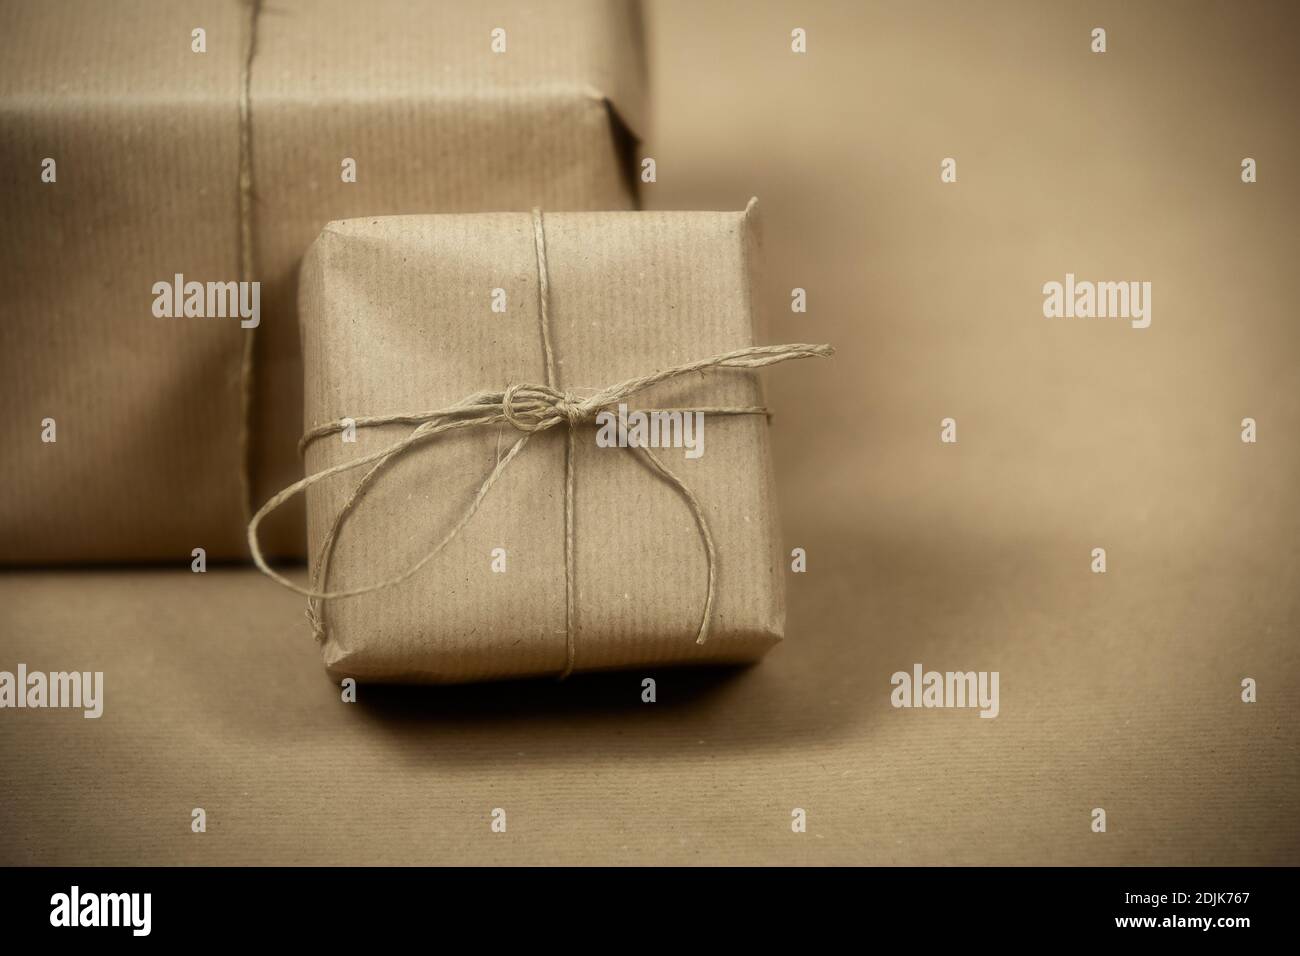 A gift wrapped in plain red paper with a raffia bow are set on a white  background. Horizontal shot. Isolated on white Stock Photo - Alamy